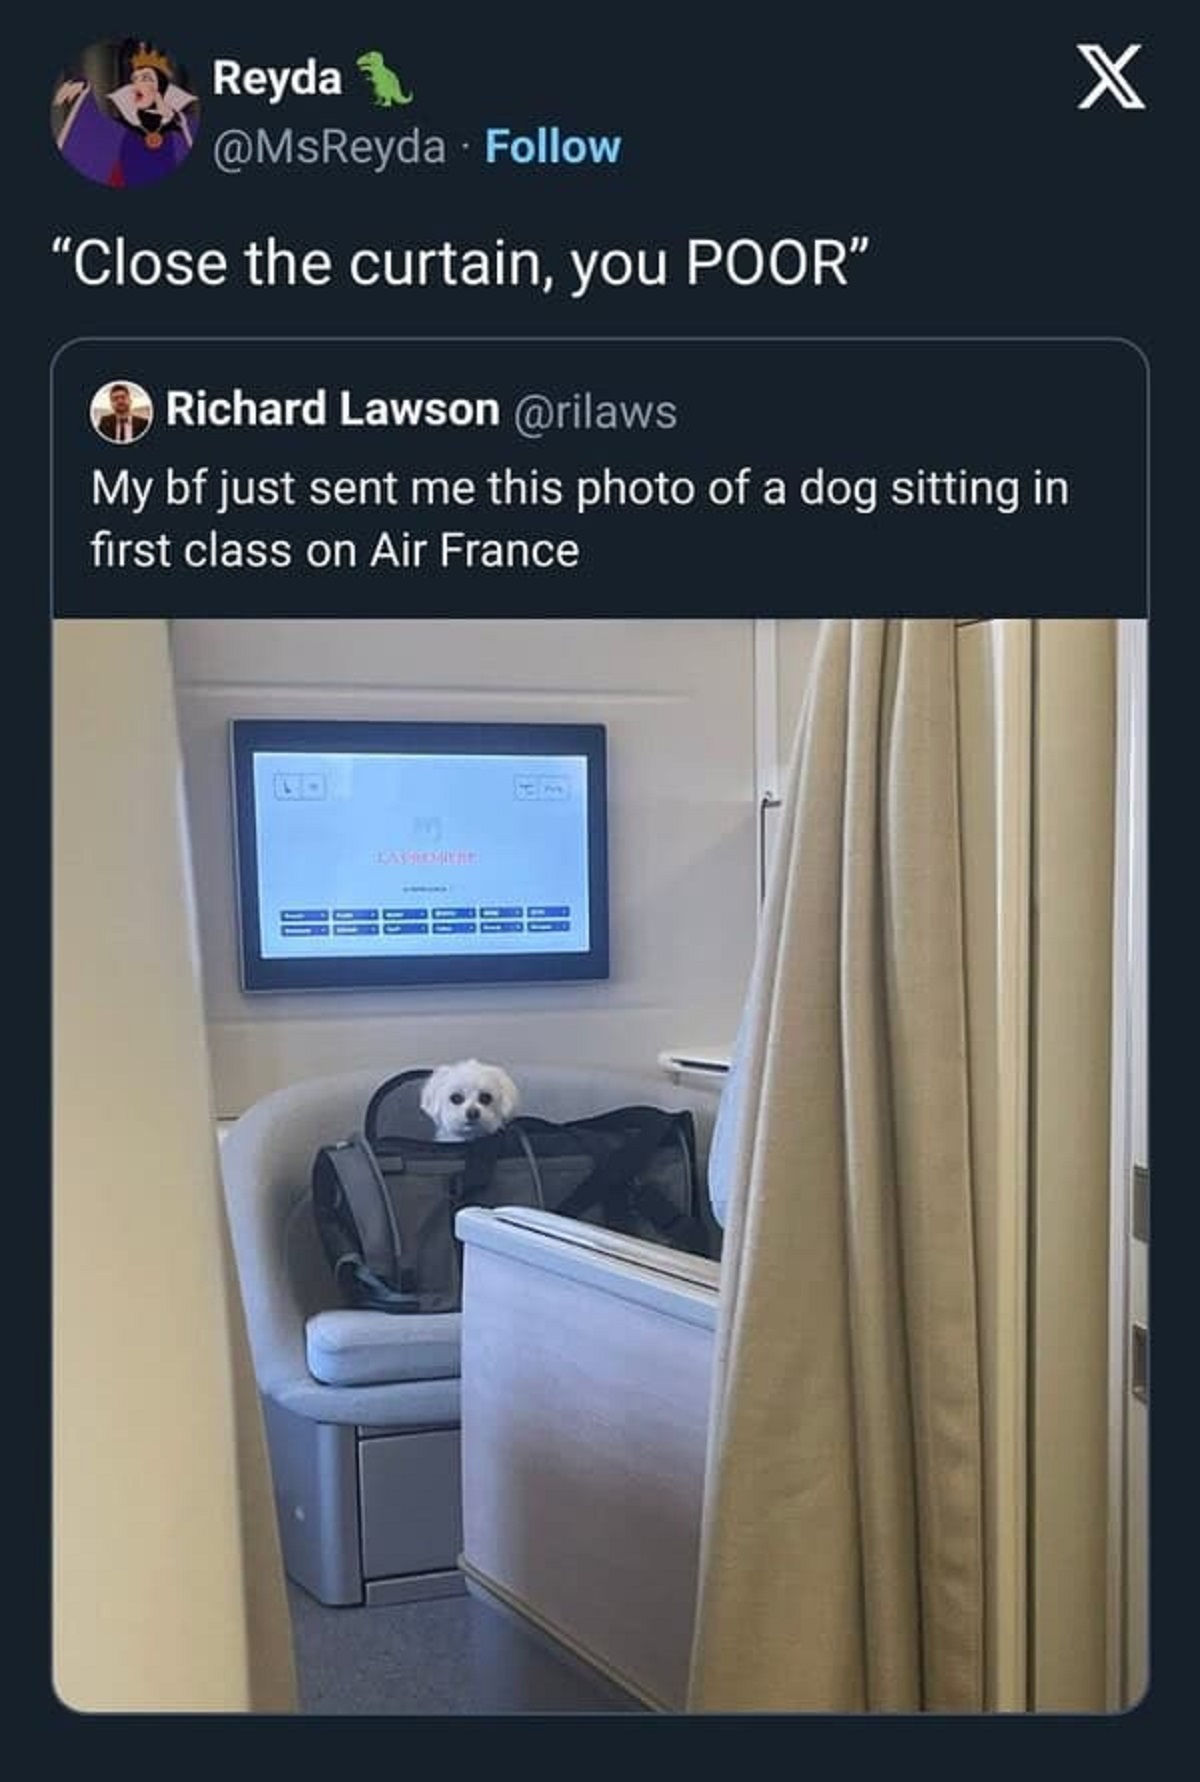 flat panel display - Reyda "Close the curtain, you Poor" Richard Lawson My bf just sent me this photo of a dog sitting in first class on Air France 222222 X